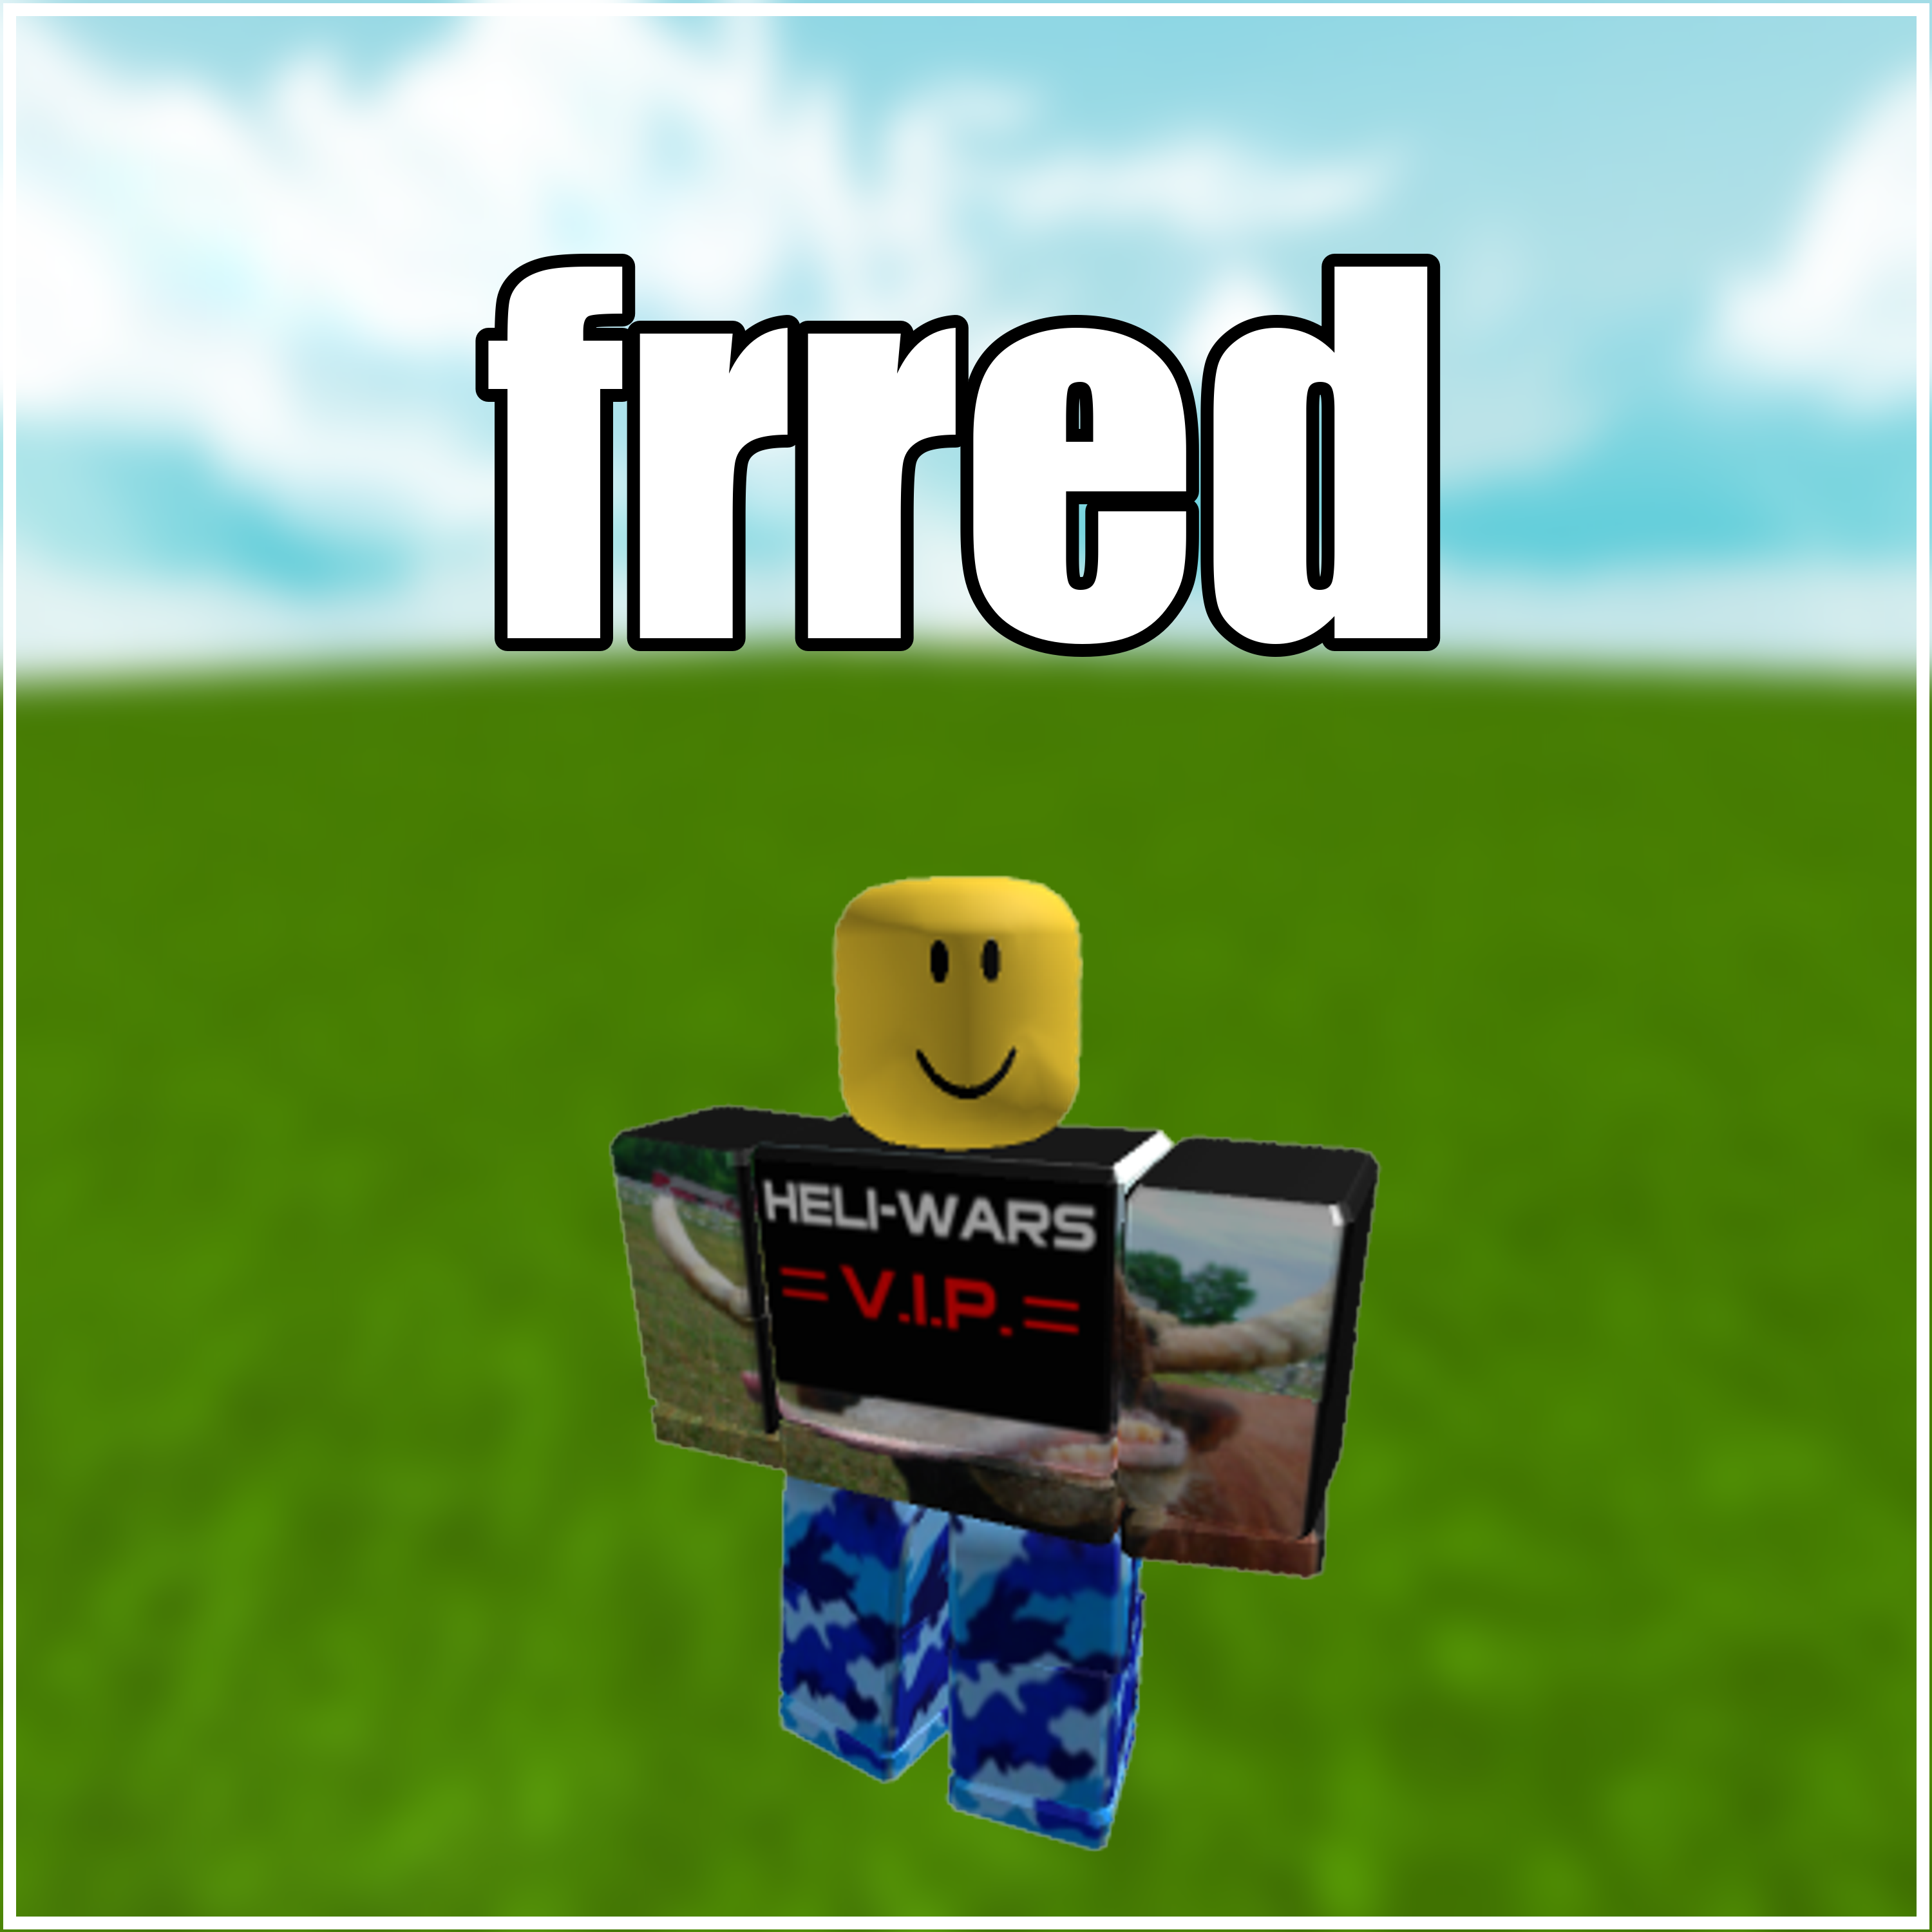 robruh RARE username "frred" ROBLOX account guaranteed to be unverified!